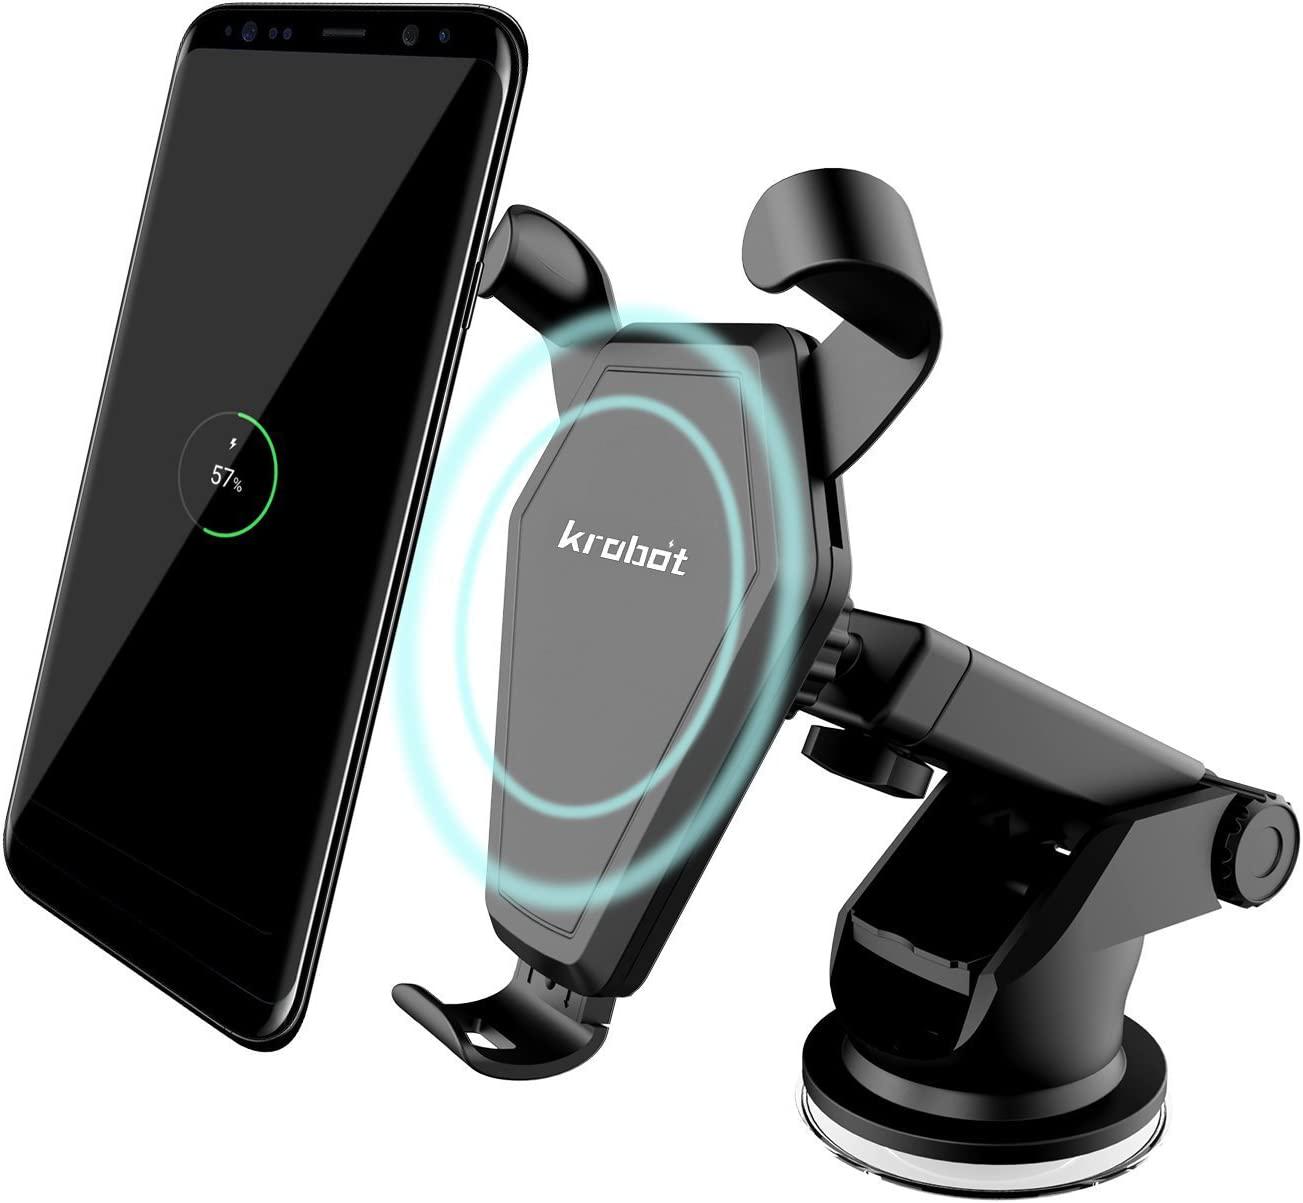 Krobot, Krobot Wireless Fast Charger Car Mount Qi for Samsung Galaxy S8, S7/S7 Edge, Note 8/5 Huawei Standard Charge for iPhone X,iPhone 8/8 Plus and Qi Enabled Devices and other Smartphone